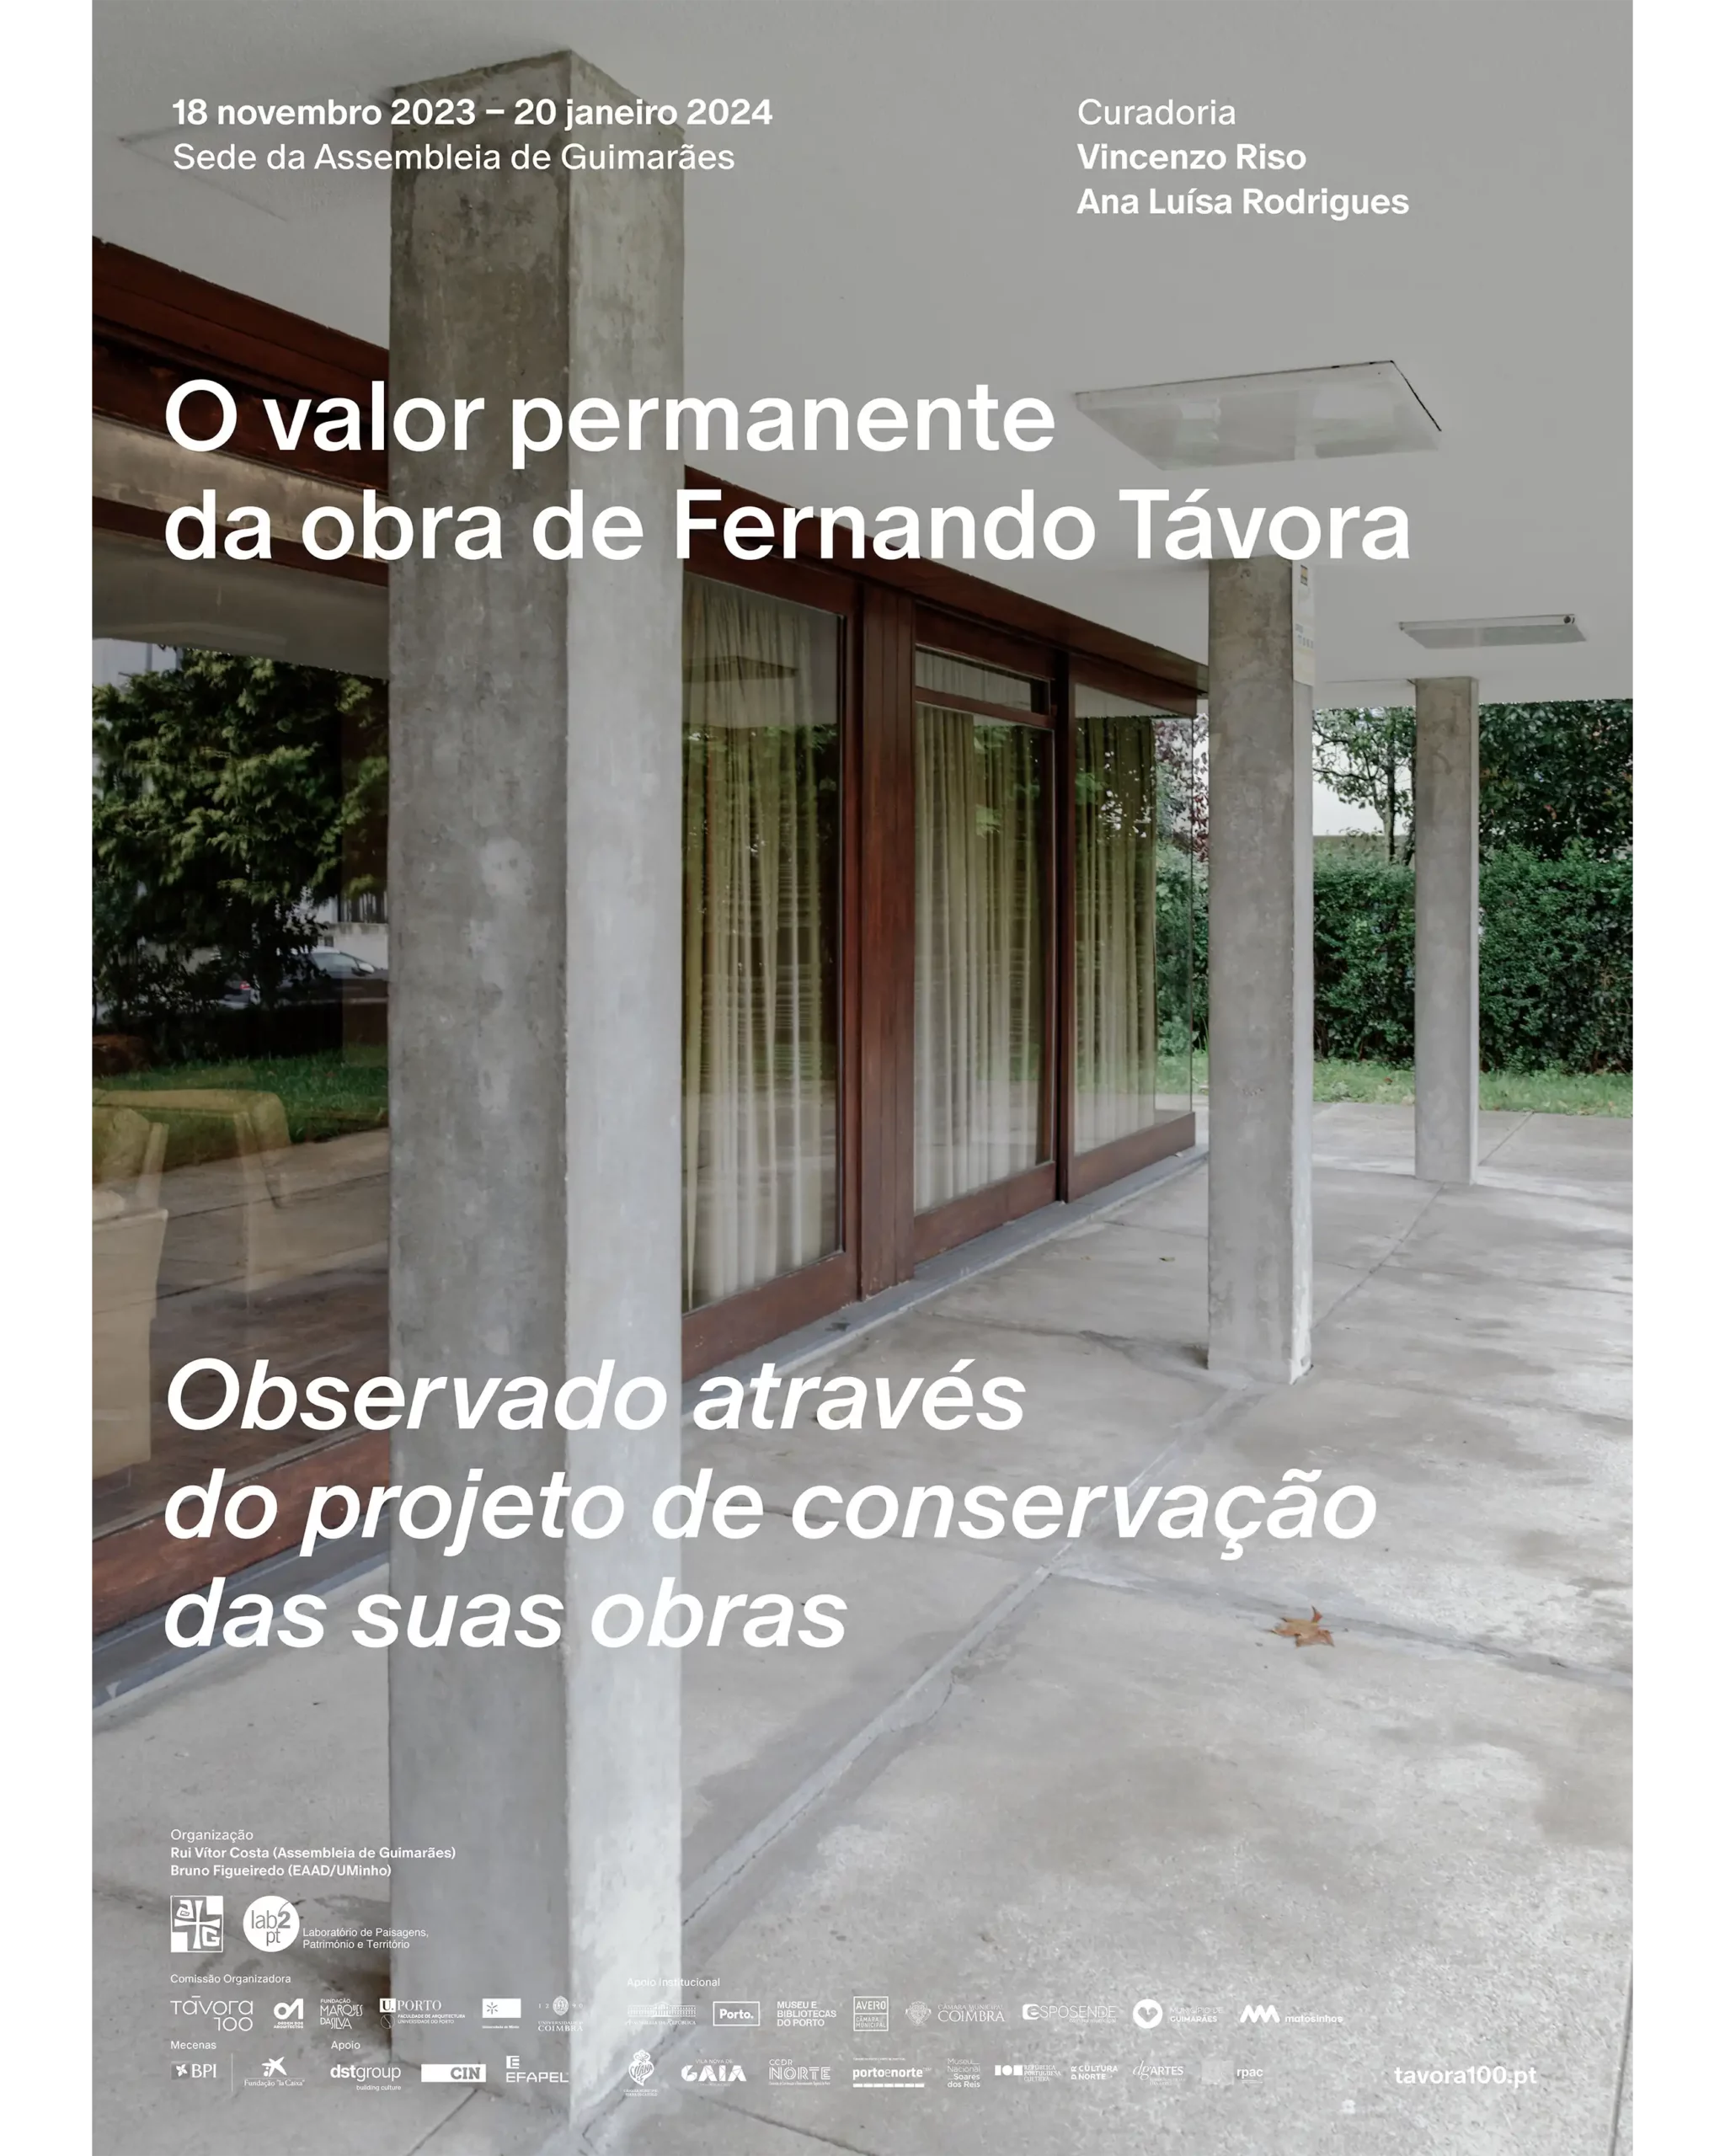 The enduring value of Fernando Távora's work image